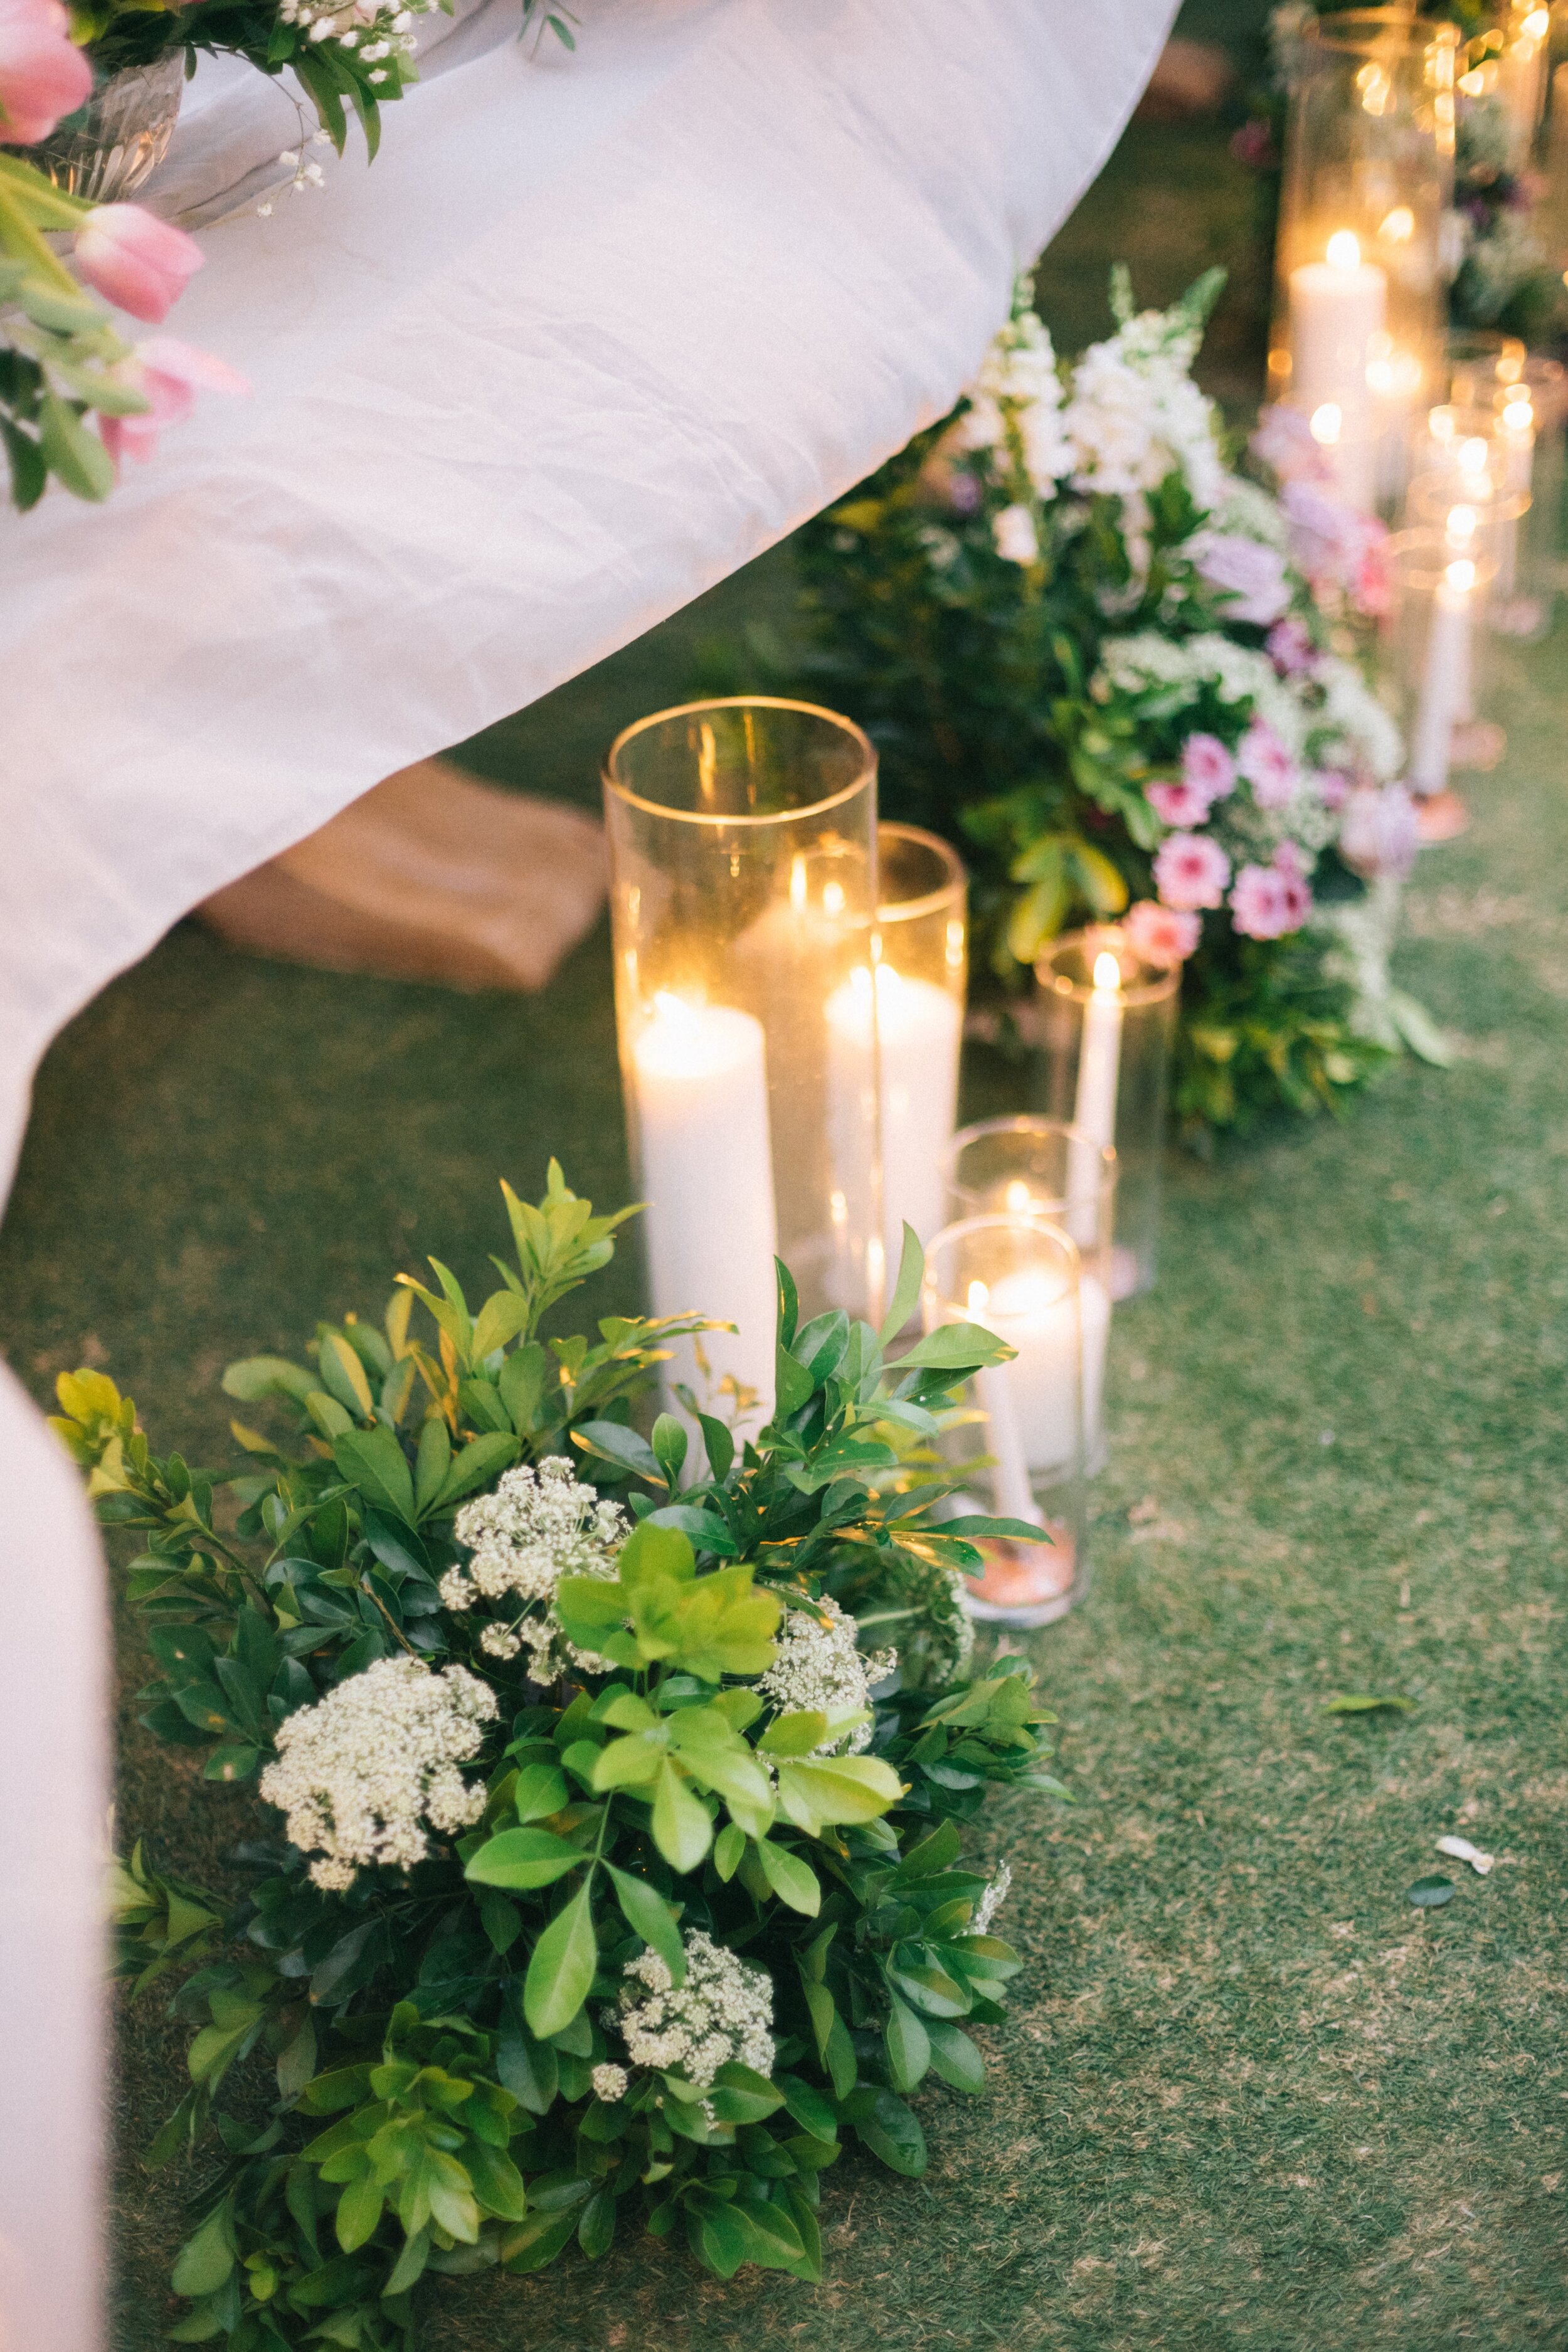 lighted-candles-and-flowers-2970287.jpg